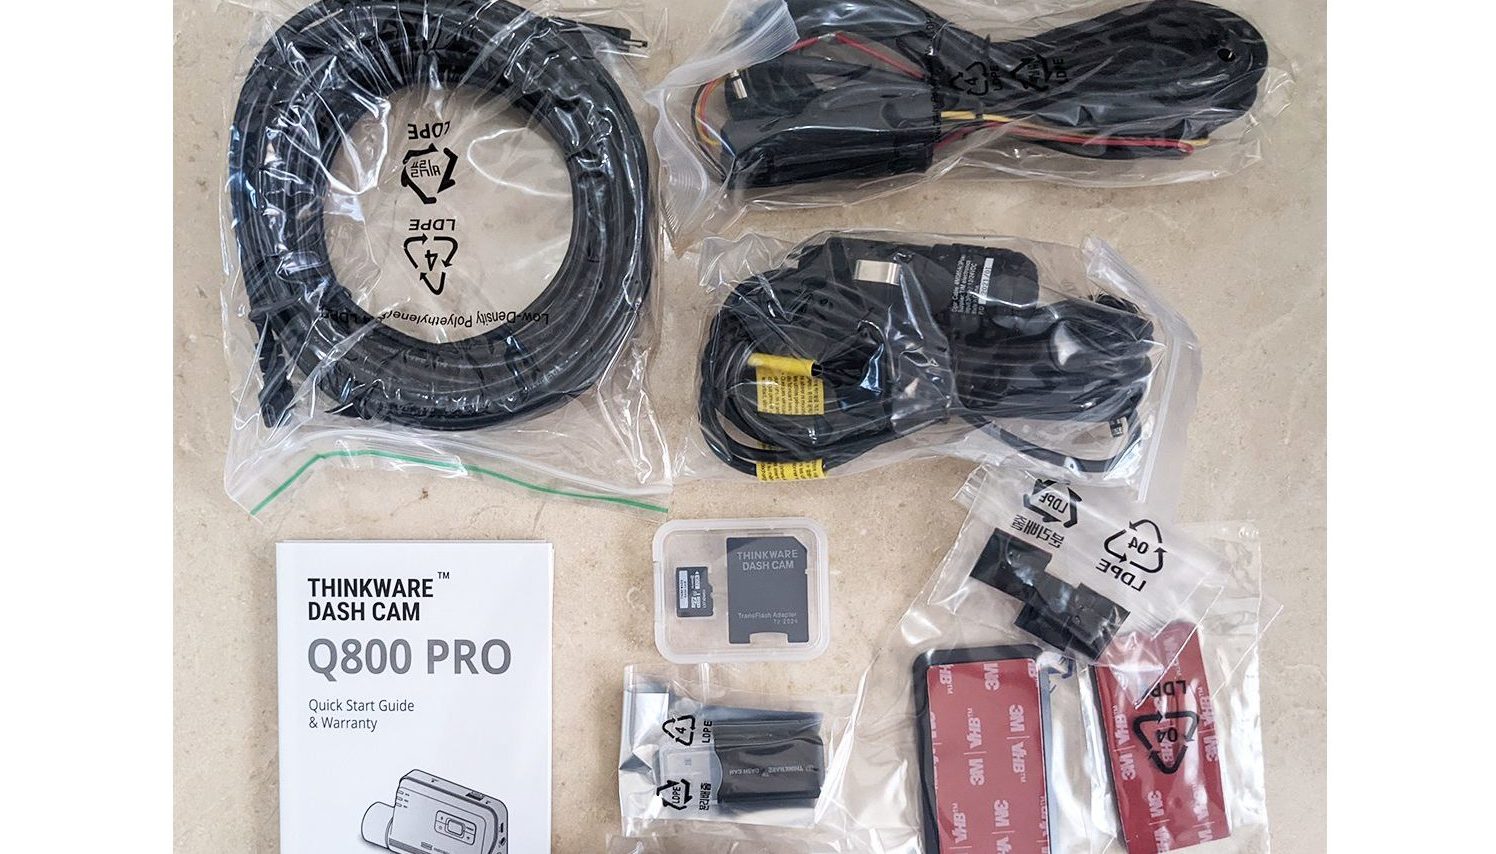 Thinkware Q800 PRO contents in the box